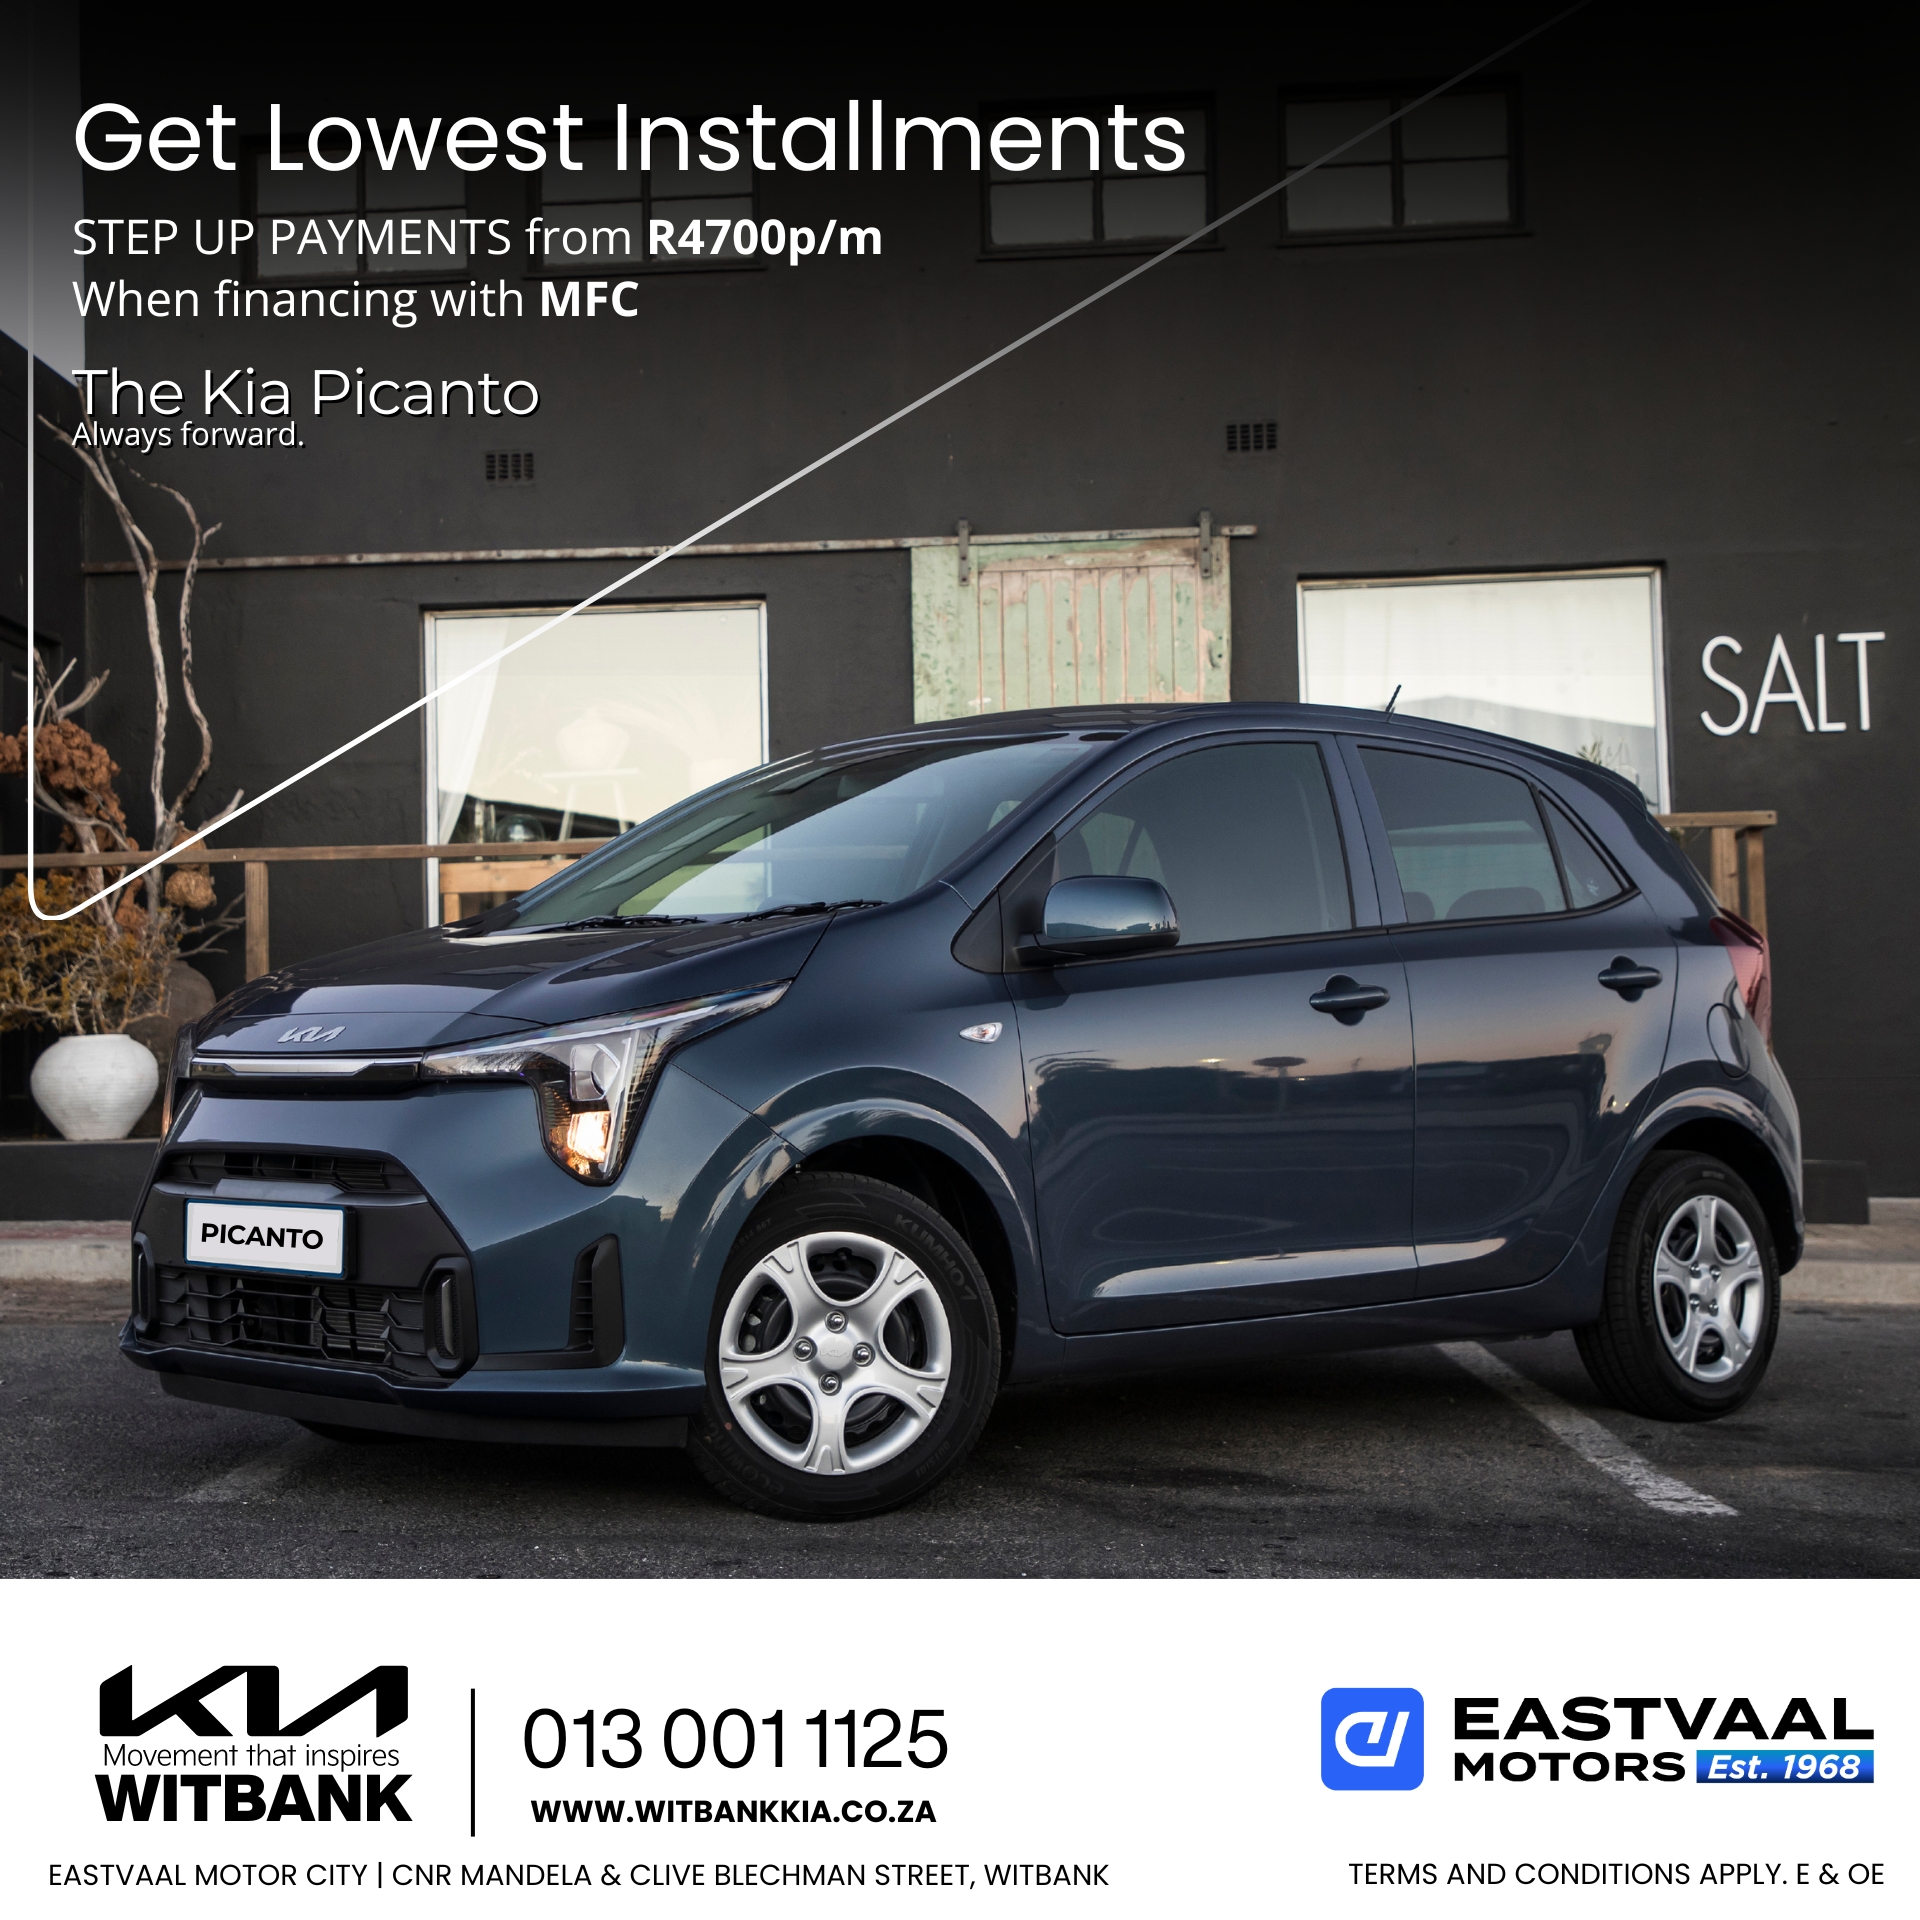 Rev up your summer with a brand-new Kia! Visit Eastvaal Motor City for the best deals. image from Eastvaal Motors